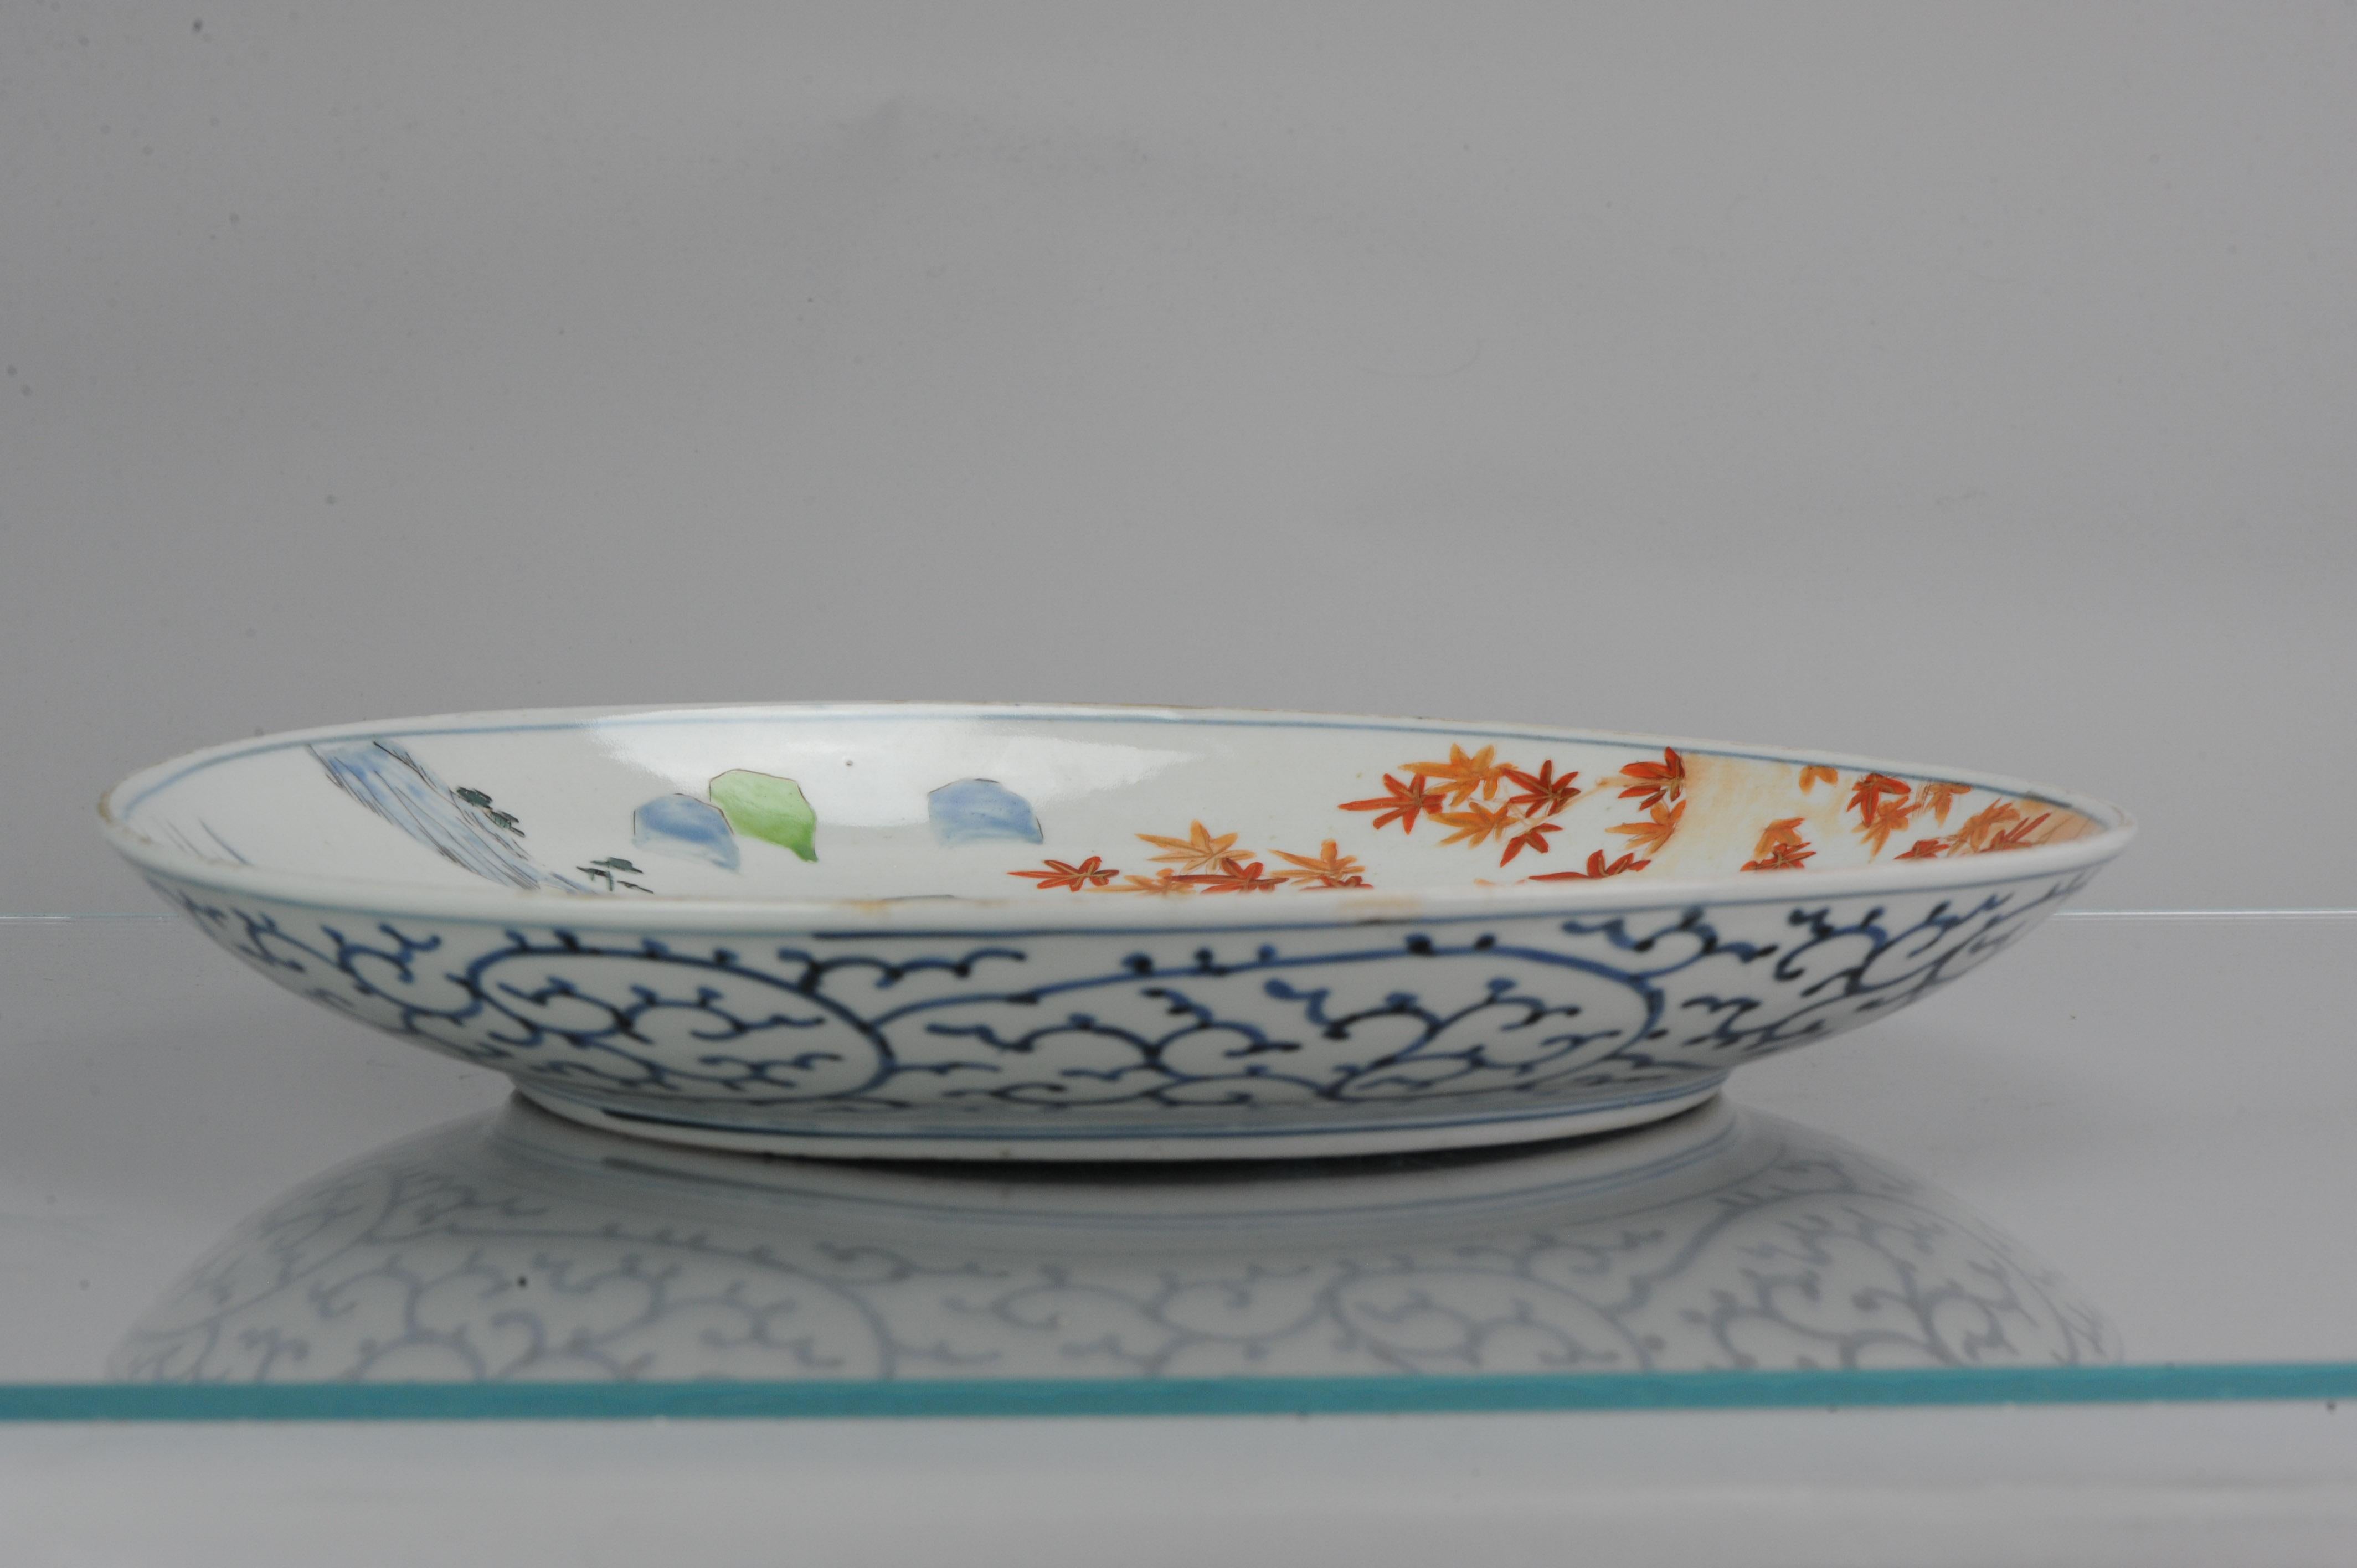 Large and very nice piece. Also painted nicely at the base.

Additional information:
Material: Porcelain & Pottery
Region of Origin: Japan
Period: Meiji Periode (1867-1912), Showa Periode (1926-1989), Taisho Periode (1912-1926)
Age: ca